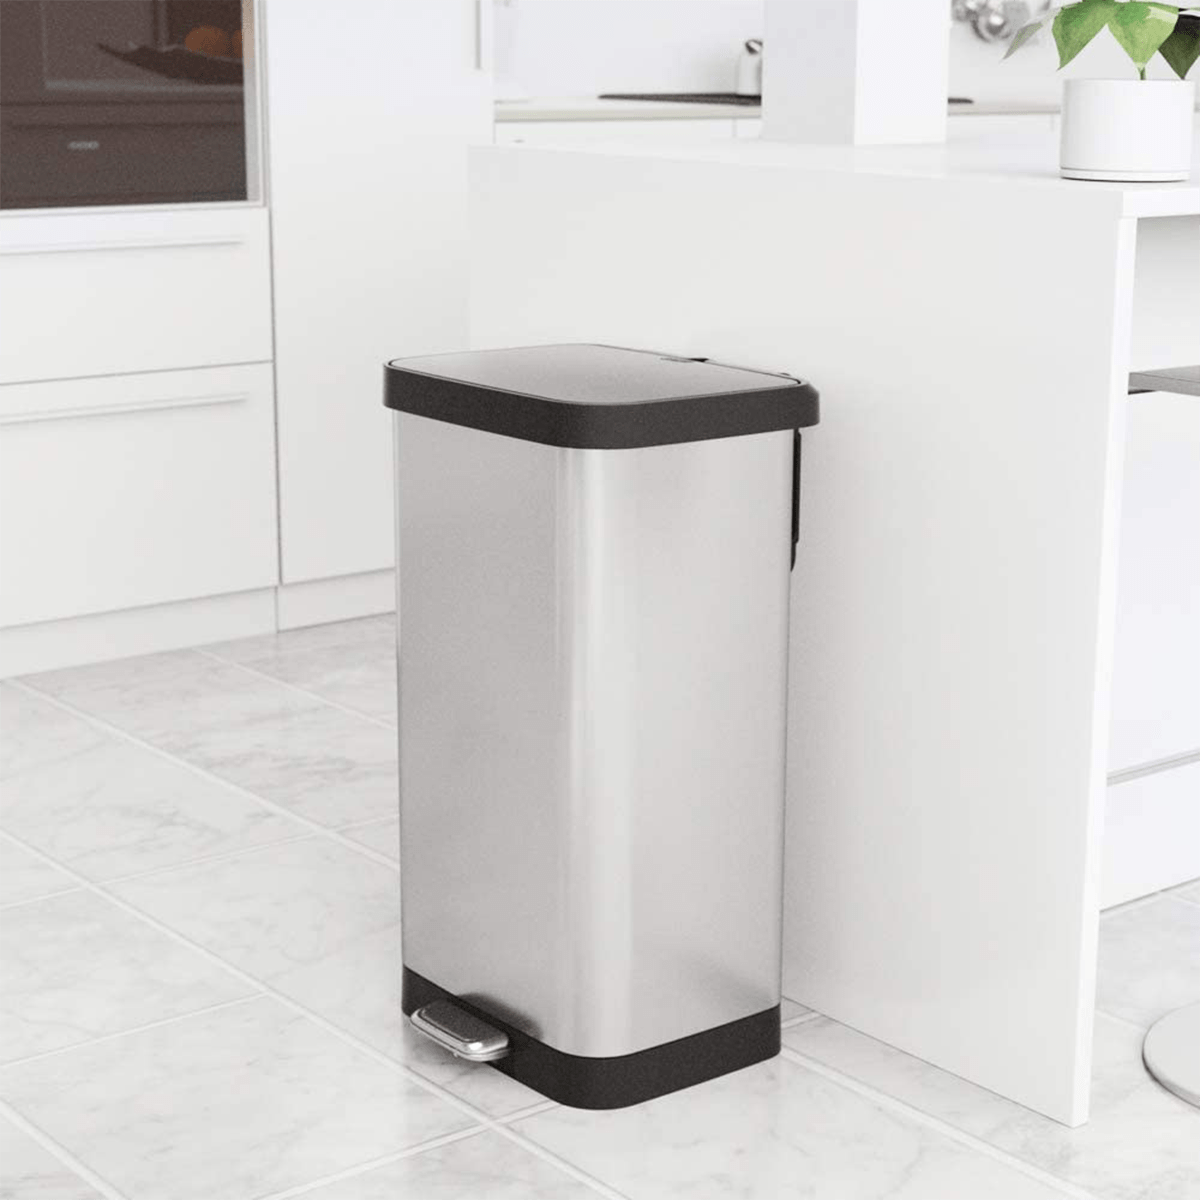 https://www.tasteofhome.com/wp-content/uploads/1969/12/15-kitchen-trash-cans-for-every-style-and-budget-ft-via-merchant.png